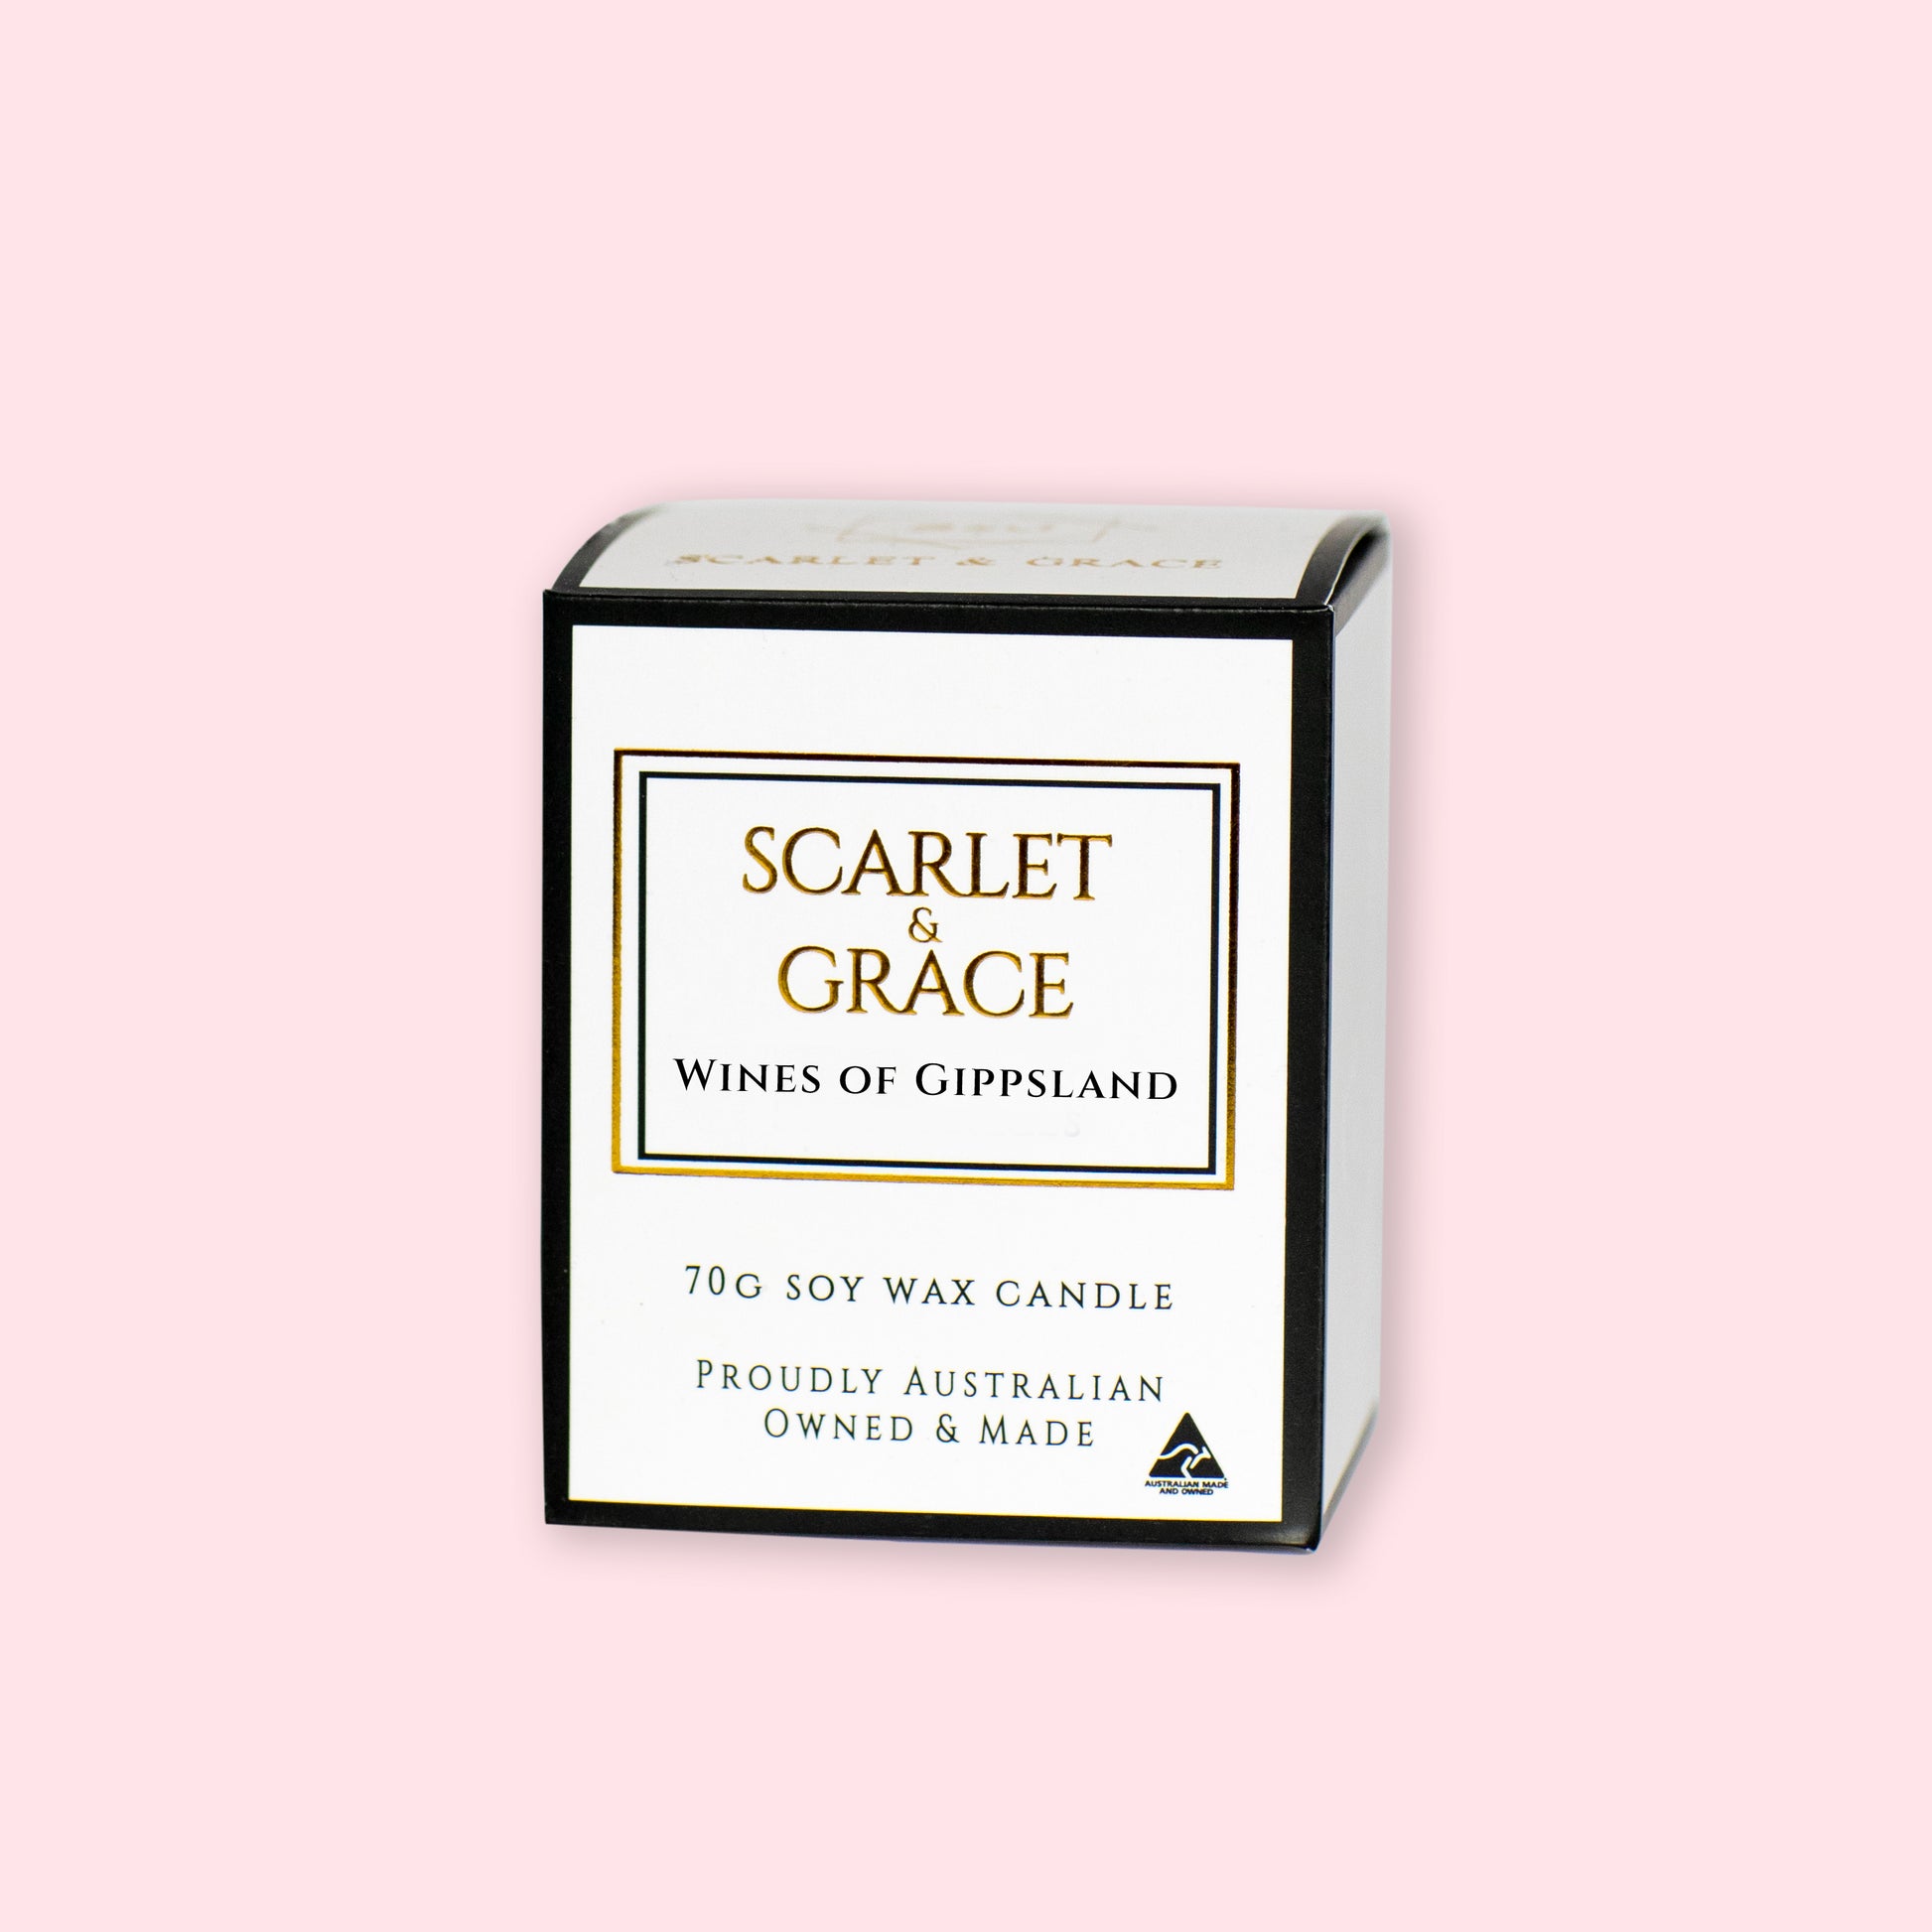 Wines of Gippsland - 70gm Soy Wax Candle - Scarlet & Grace